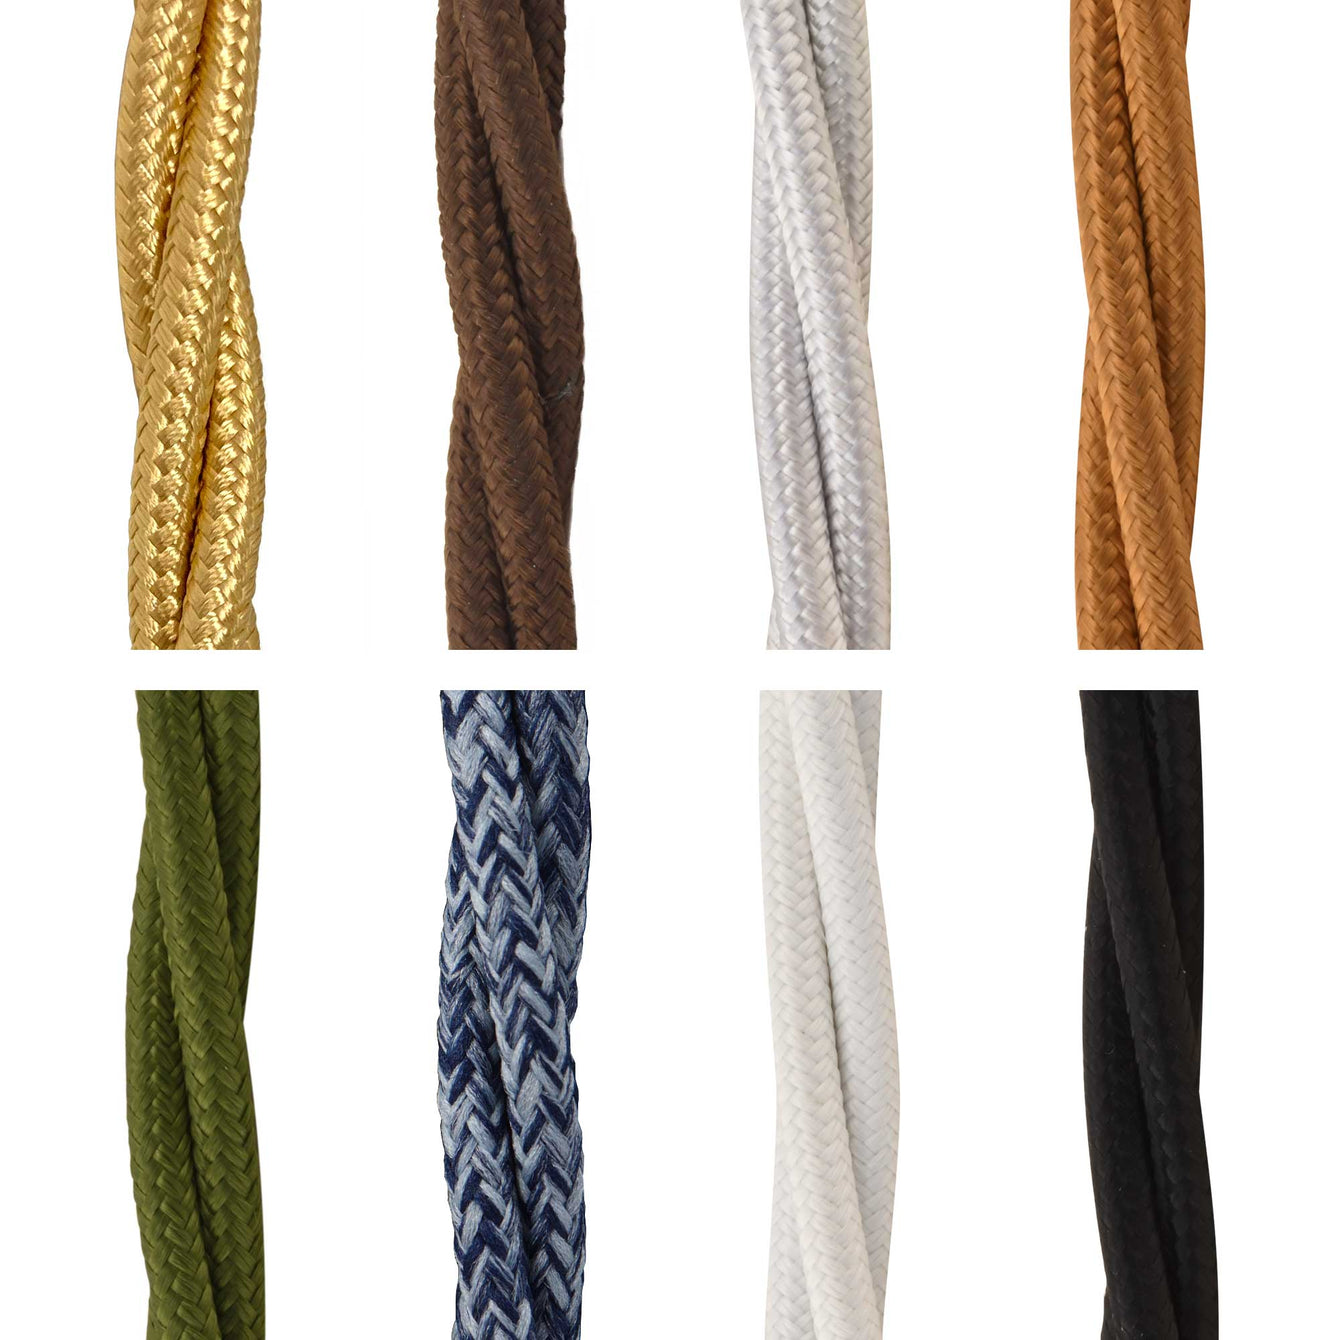 ElekTek Twisted Braided Fabric Lighting Cable Flex for Pendant or Table Lamp Per Linear Metre Colours Gold (Brass)